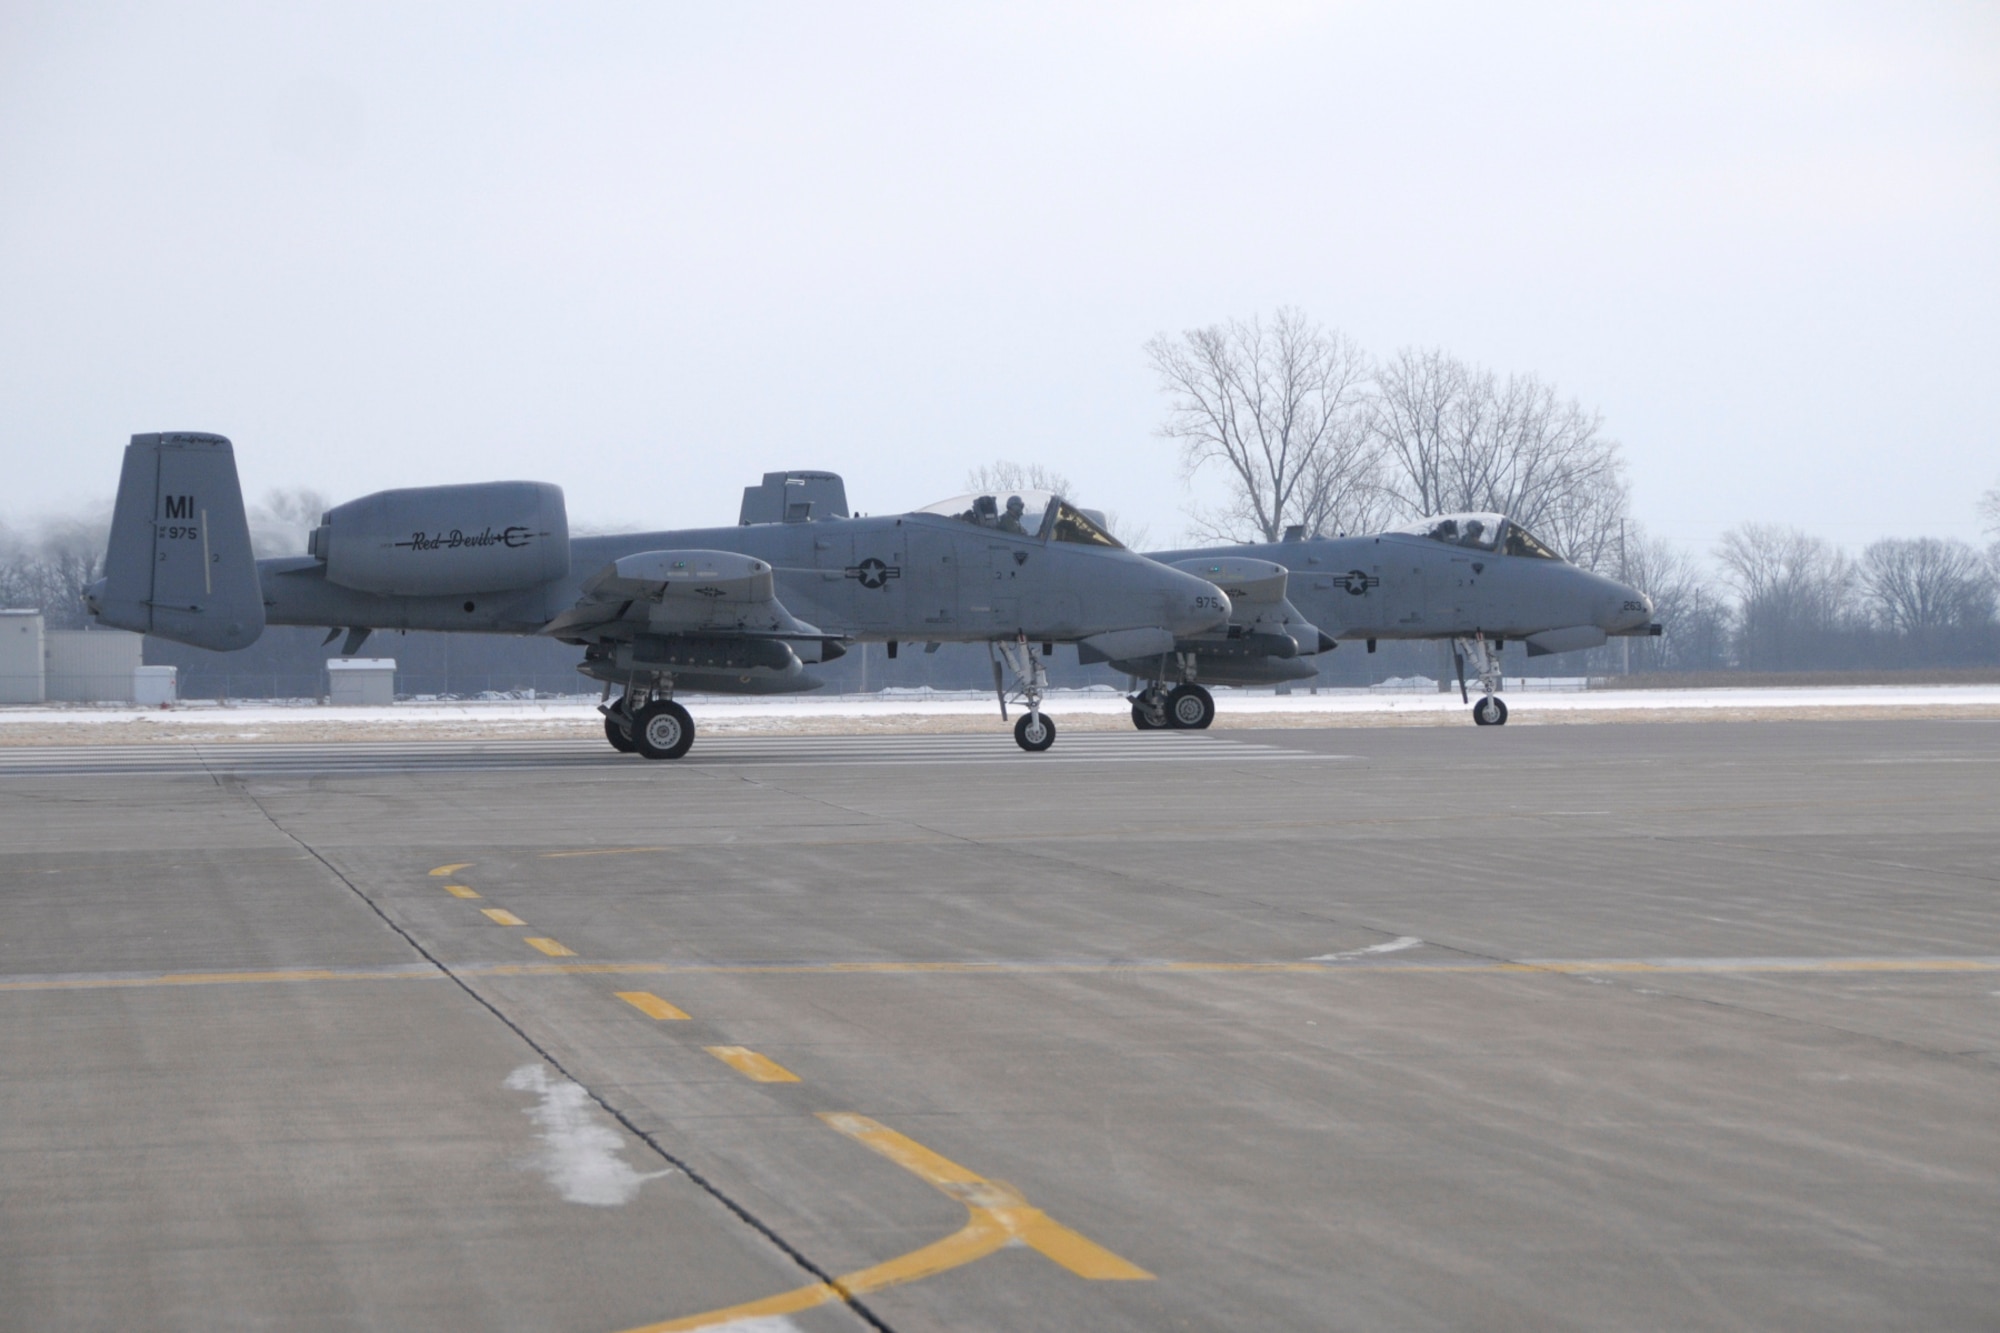 127th Wing A-10 Thunderbolt II aircraft prepare to takeoff to Operation Snowbird at Davis-Monthan AFB, Ariz., on Friday, January 23.   Operation Snowbird allows military flying units to take advantage of the optimal weather conditions and live-fire ranges available in southern Arizona during the winter months, when home station training may be hampered by snow and ice. About 200 Airmen and 10 jets from the 127th Wing deployed and will support this year's operation.  (U.S. Air National Guard photo by Brittani Baisden)